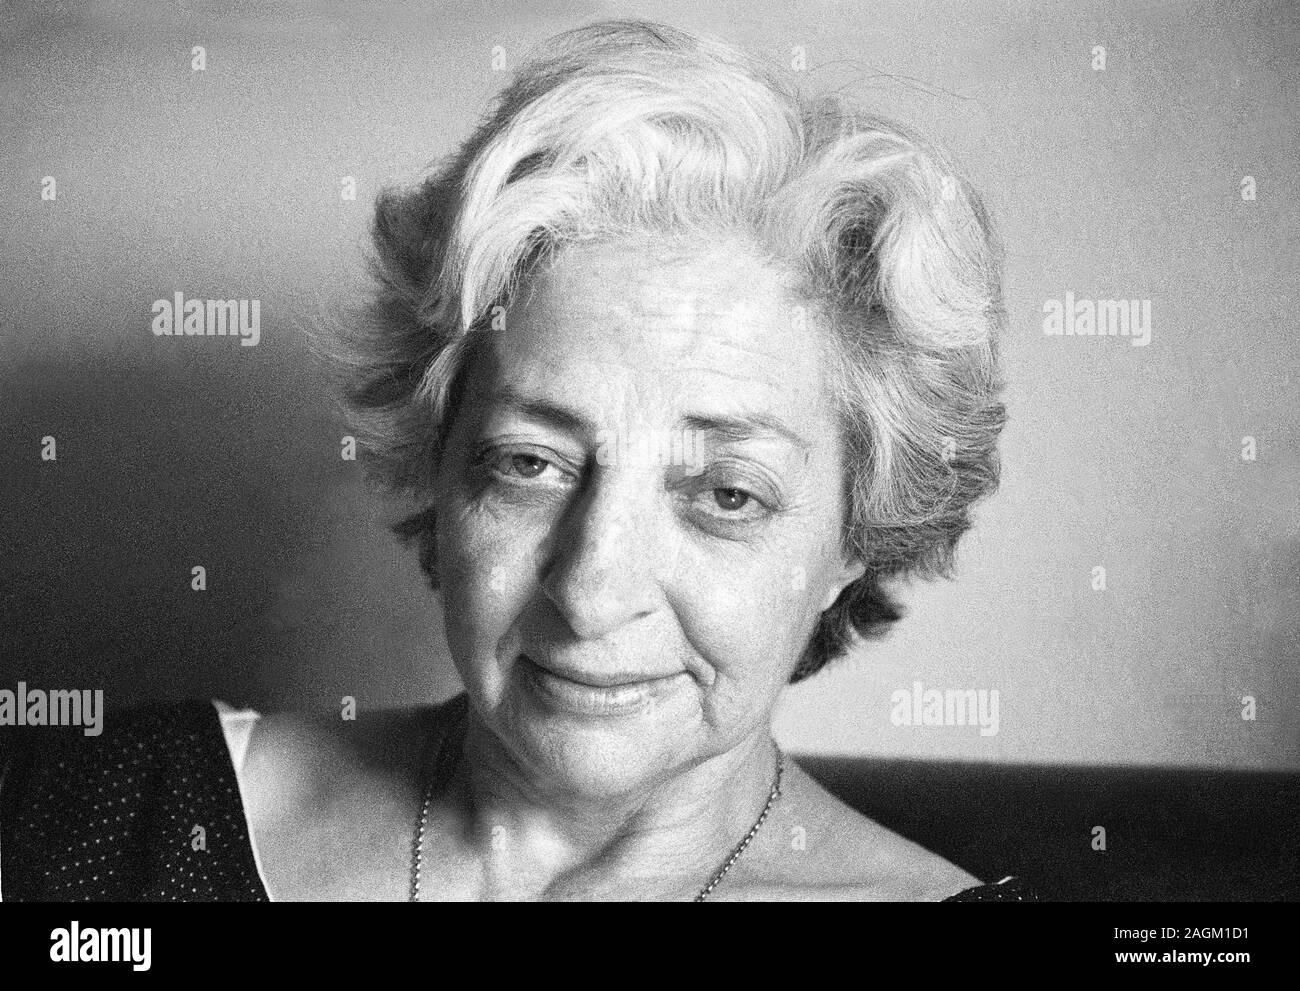 Black and white portrait of a smiling elderly woman with gray hair in a  floral dress by Linda M. Photo stock - StudioNow